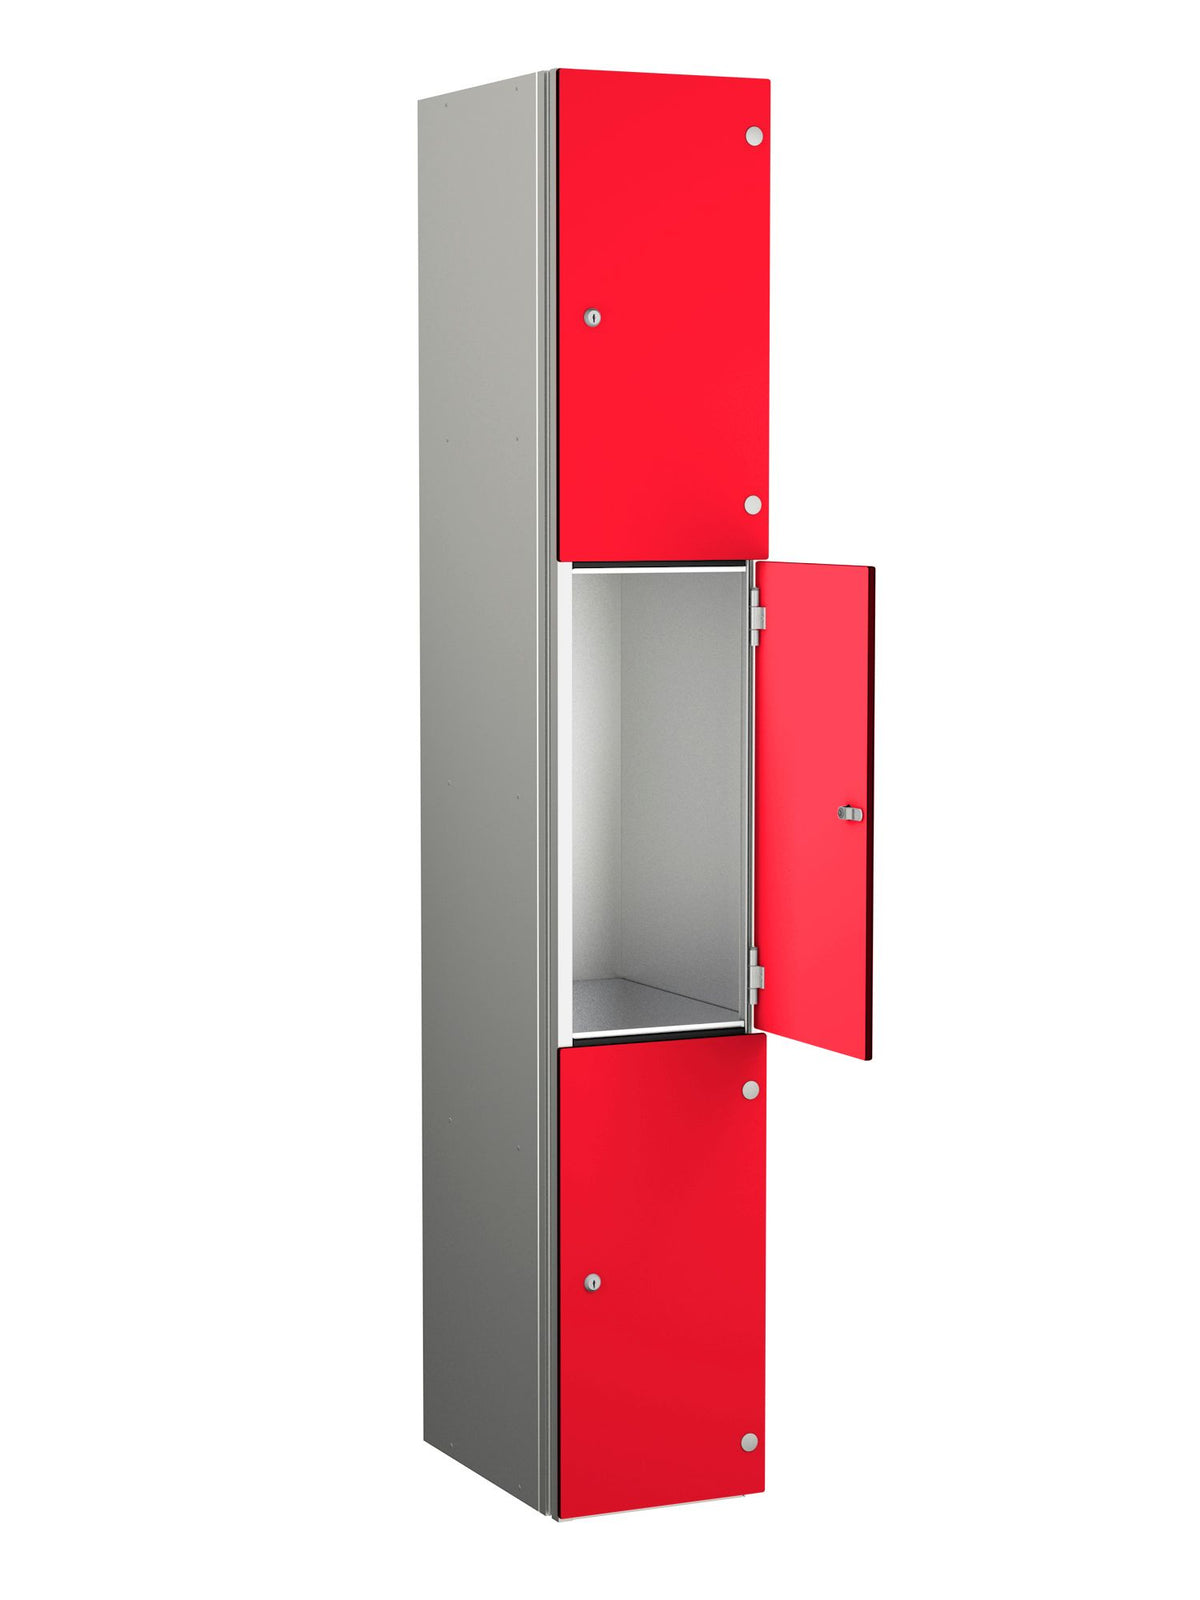 ZENBOX WET AREA LOCKERS WITH SGL DOORS - DYNASTY RED 3 DOOR Storage Lockers > Lockers > Cabinets > Storage > Probe > One Stop For Safety   